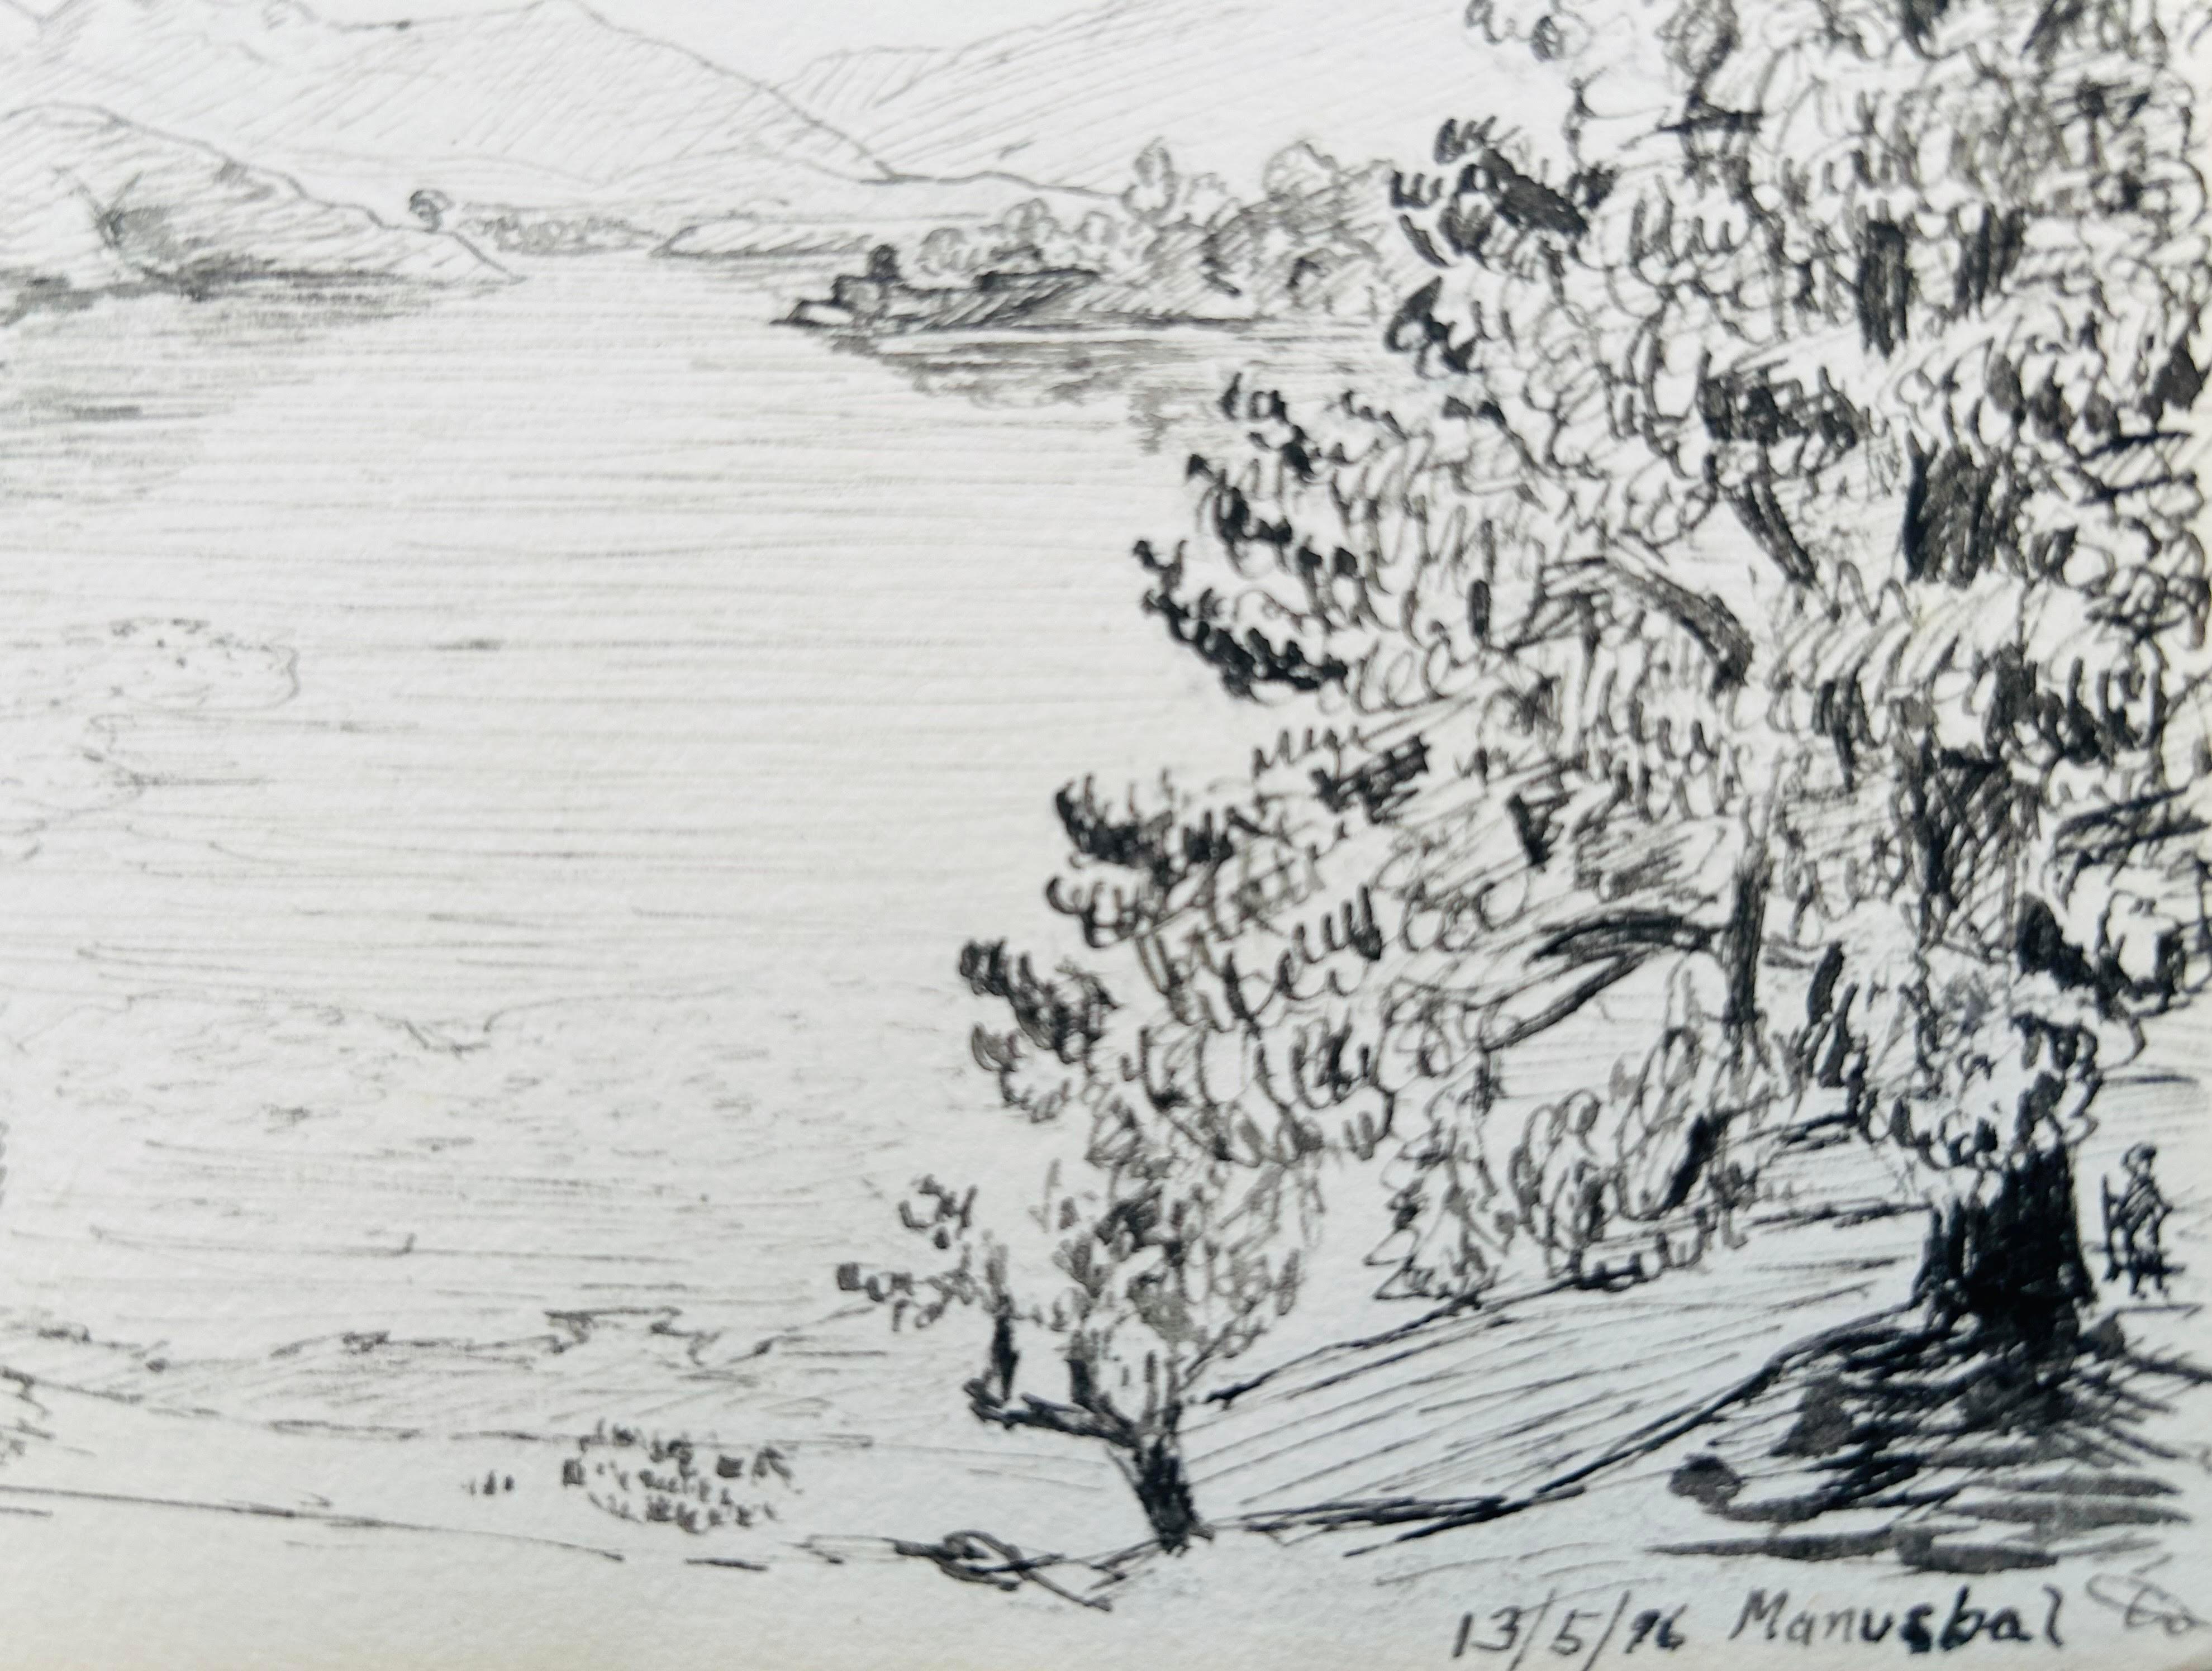 India 3 X 19th century Kashmir NW Frontier Field Sketches Manasbal Lake, Kashmir For Sale 7